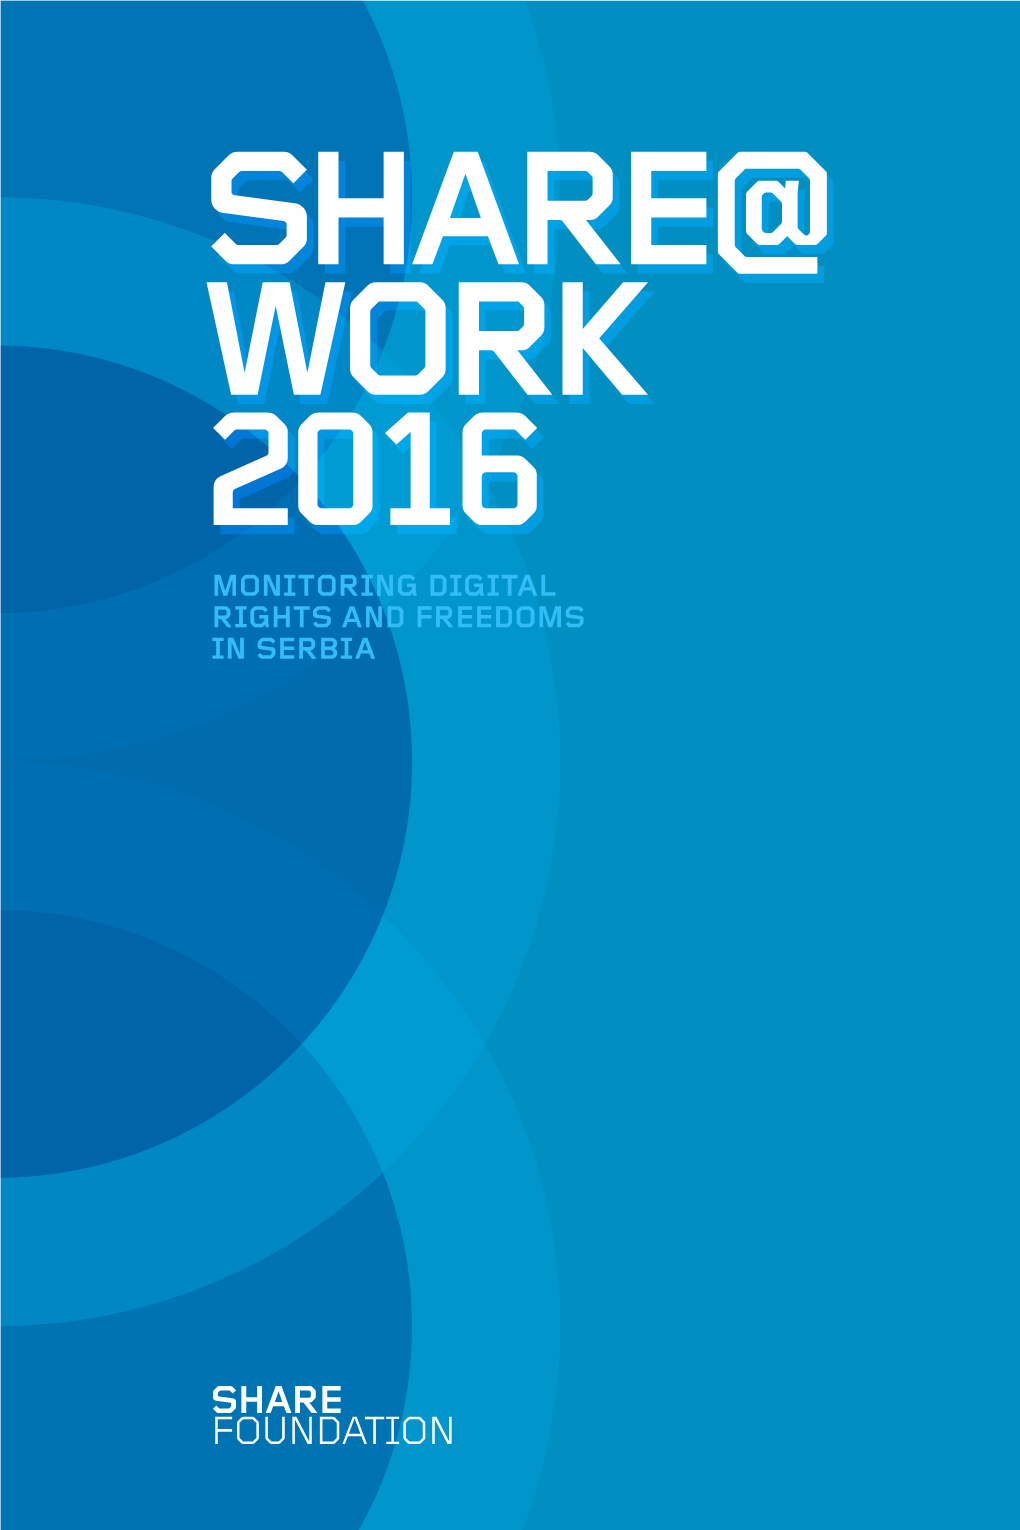 Share@Work 2016: Monitoring Digital Rights and Freedoms in Serbia